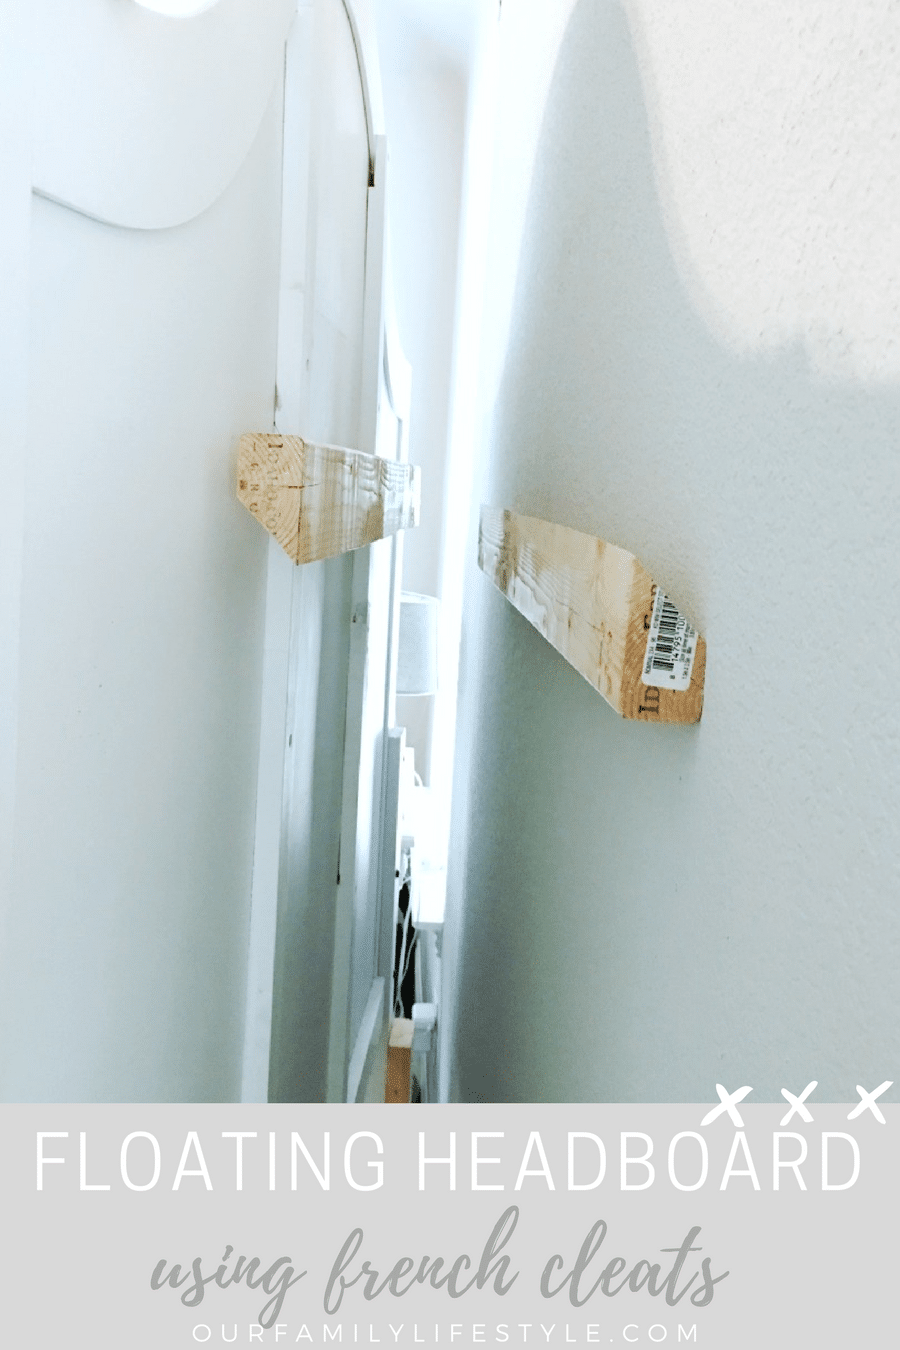 How To Mount A Headboard The Wall Using French Cleats - Can You Attach Headboard To Wall